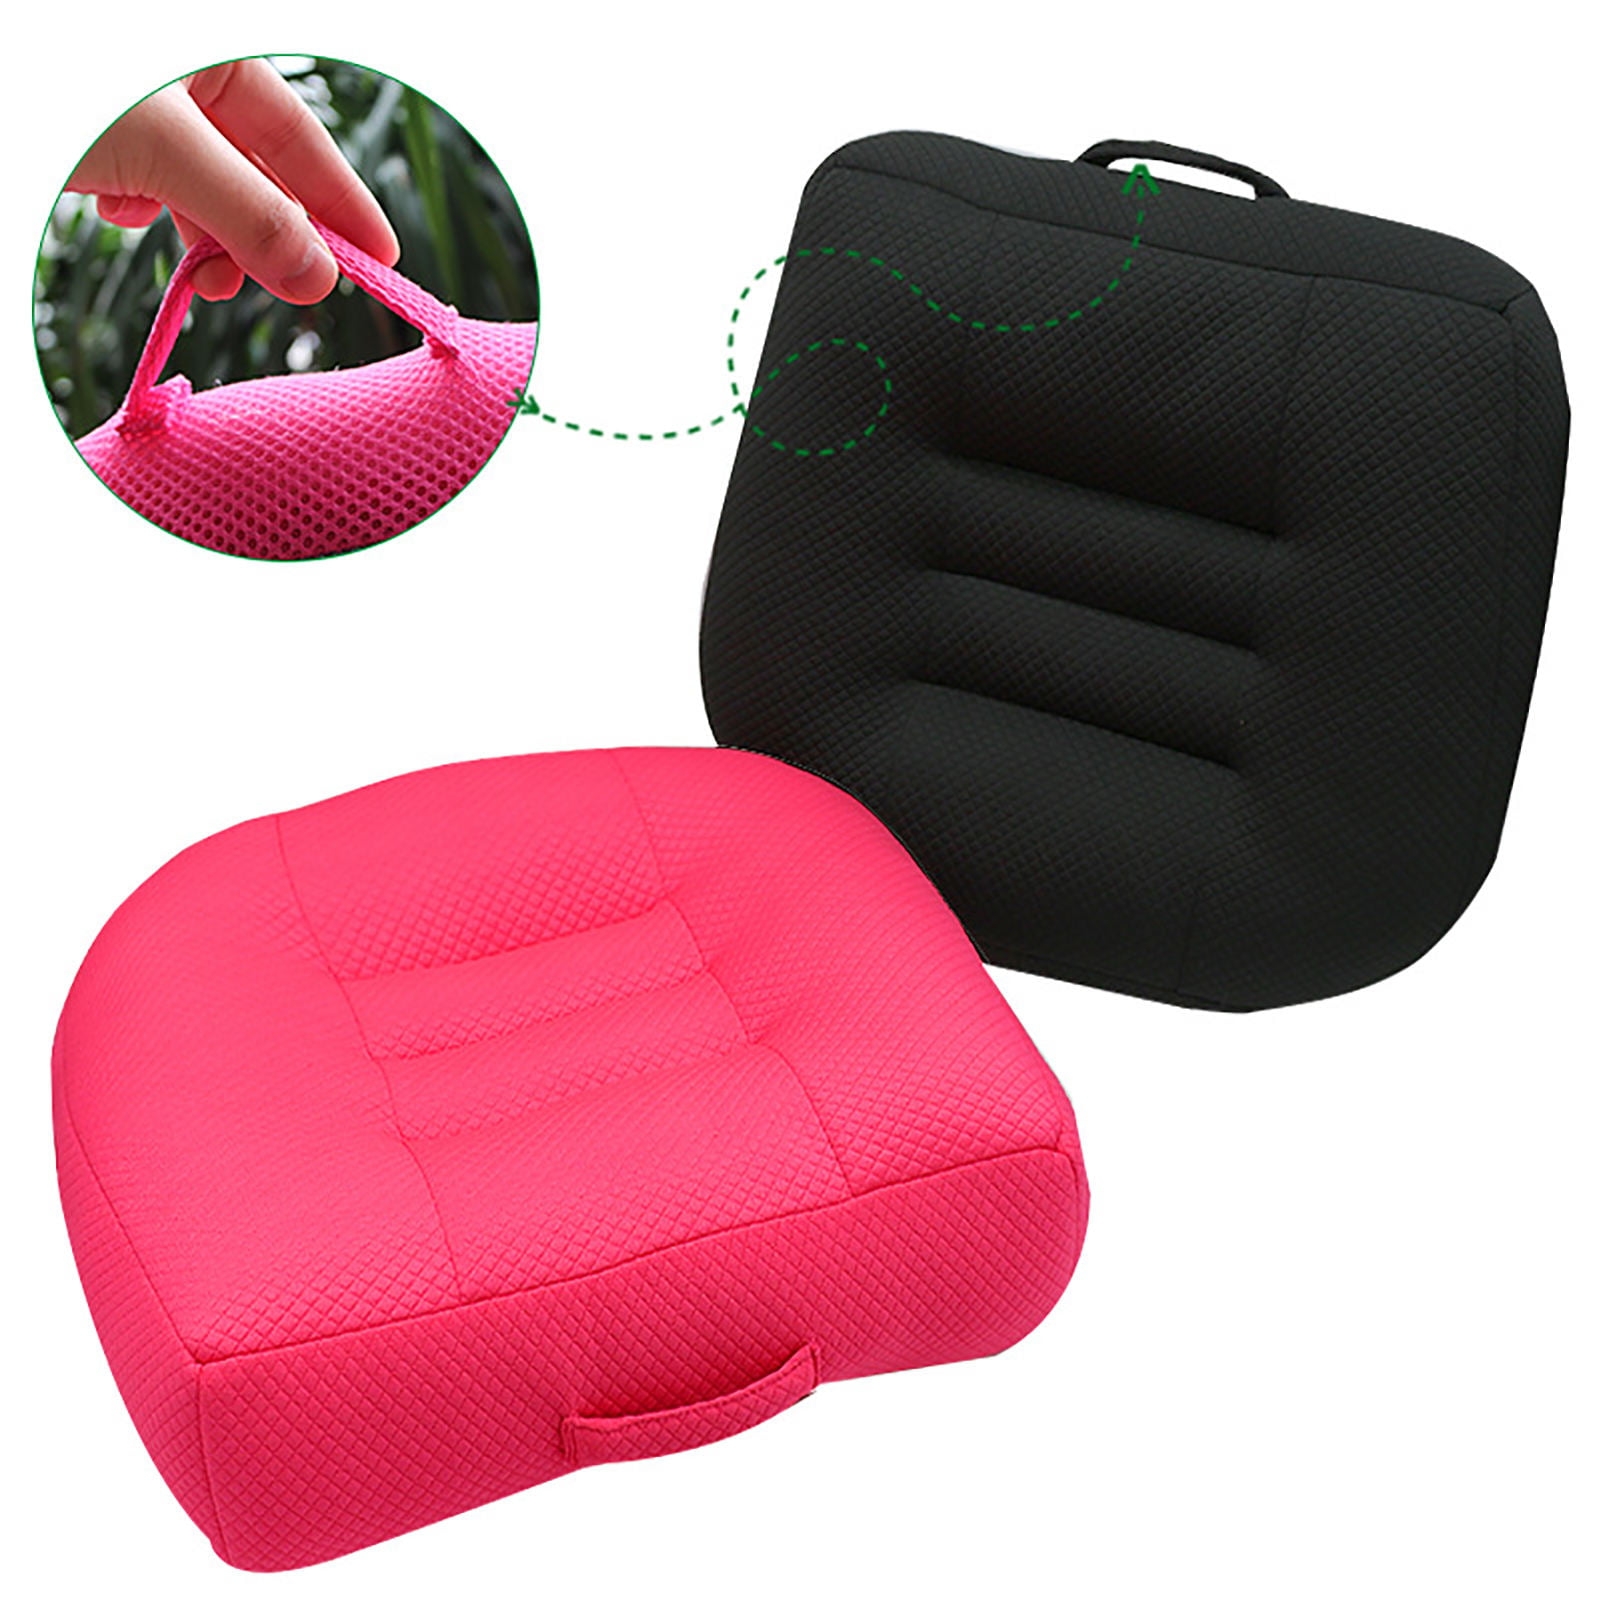 Lacyie Car Booster Seat Cushion Portable Car Seat Pad for Office